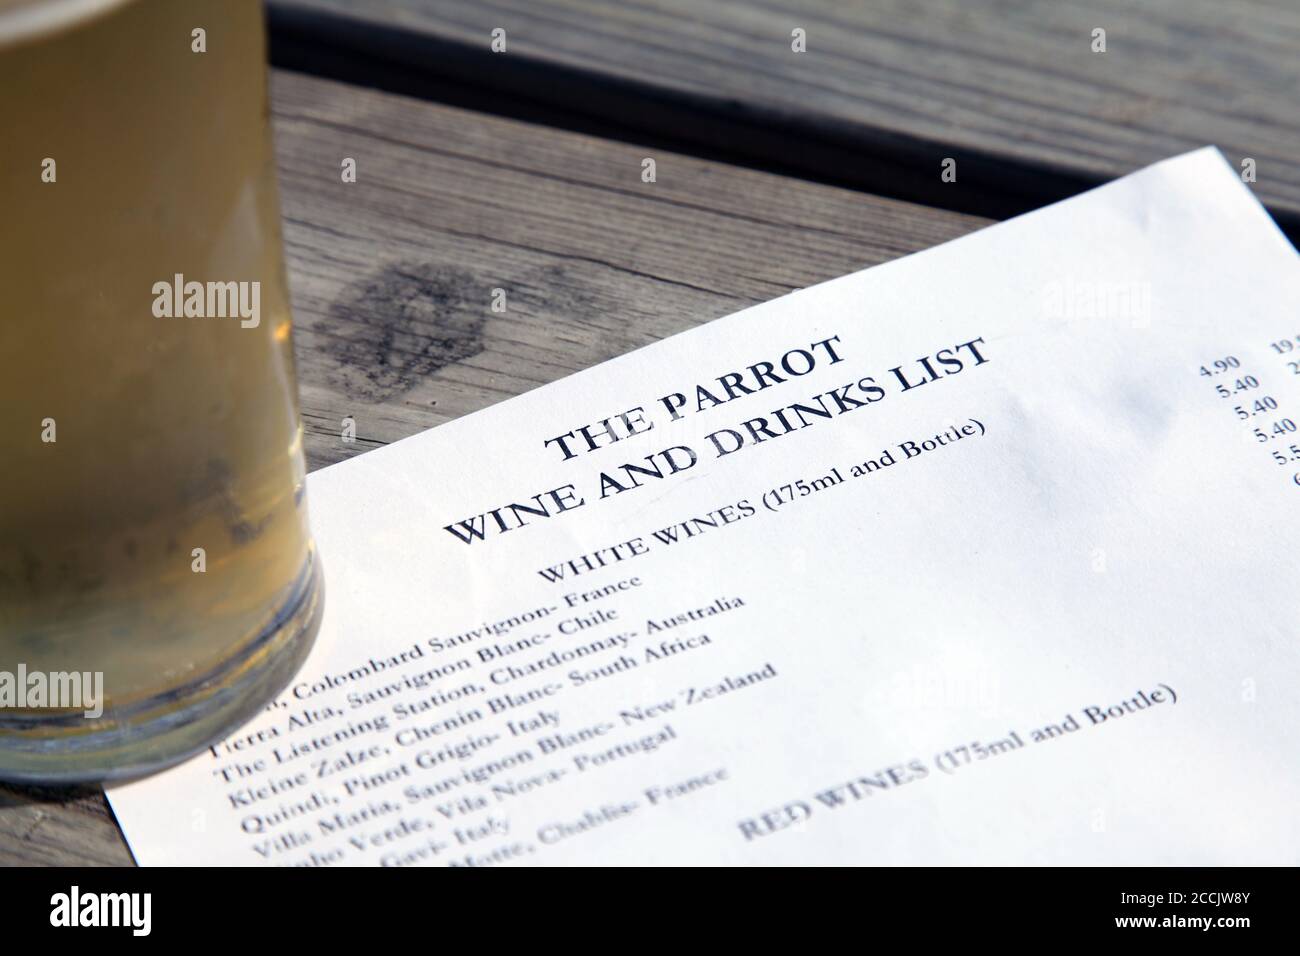 Wine and Drinks list. The Parrot Pub is a public house located in the beautiful village of Forest Green, set deep in the Surrey Hills. August 2020 Stock Photo